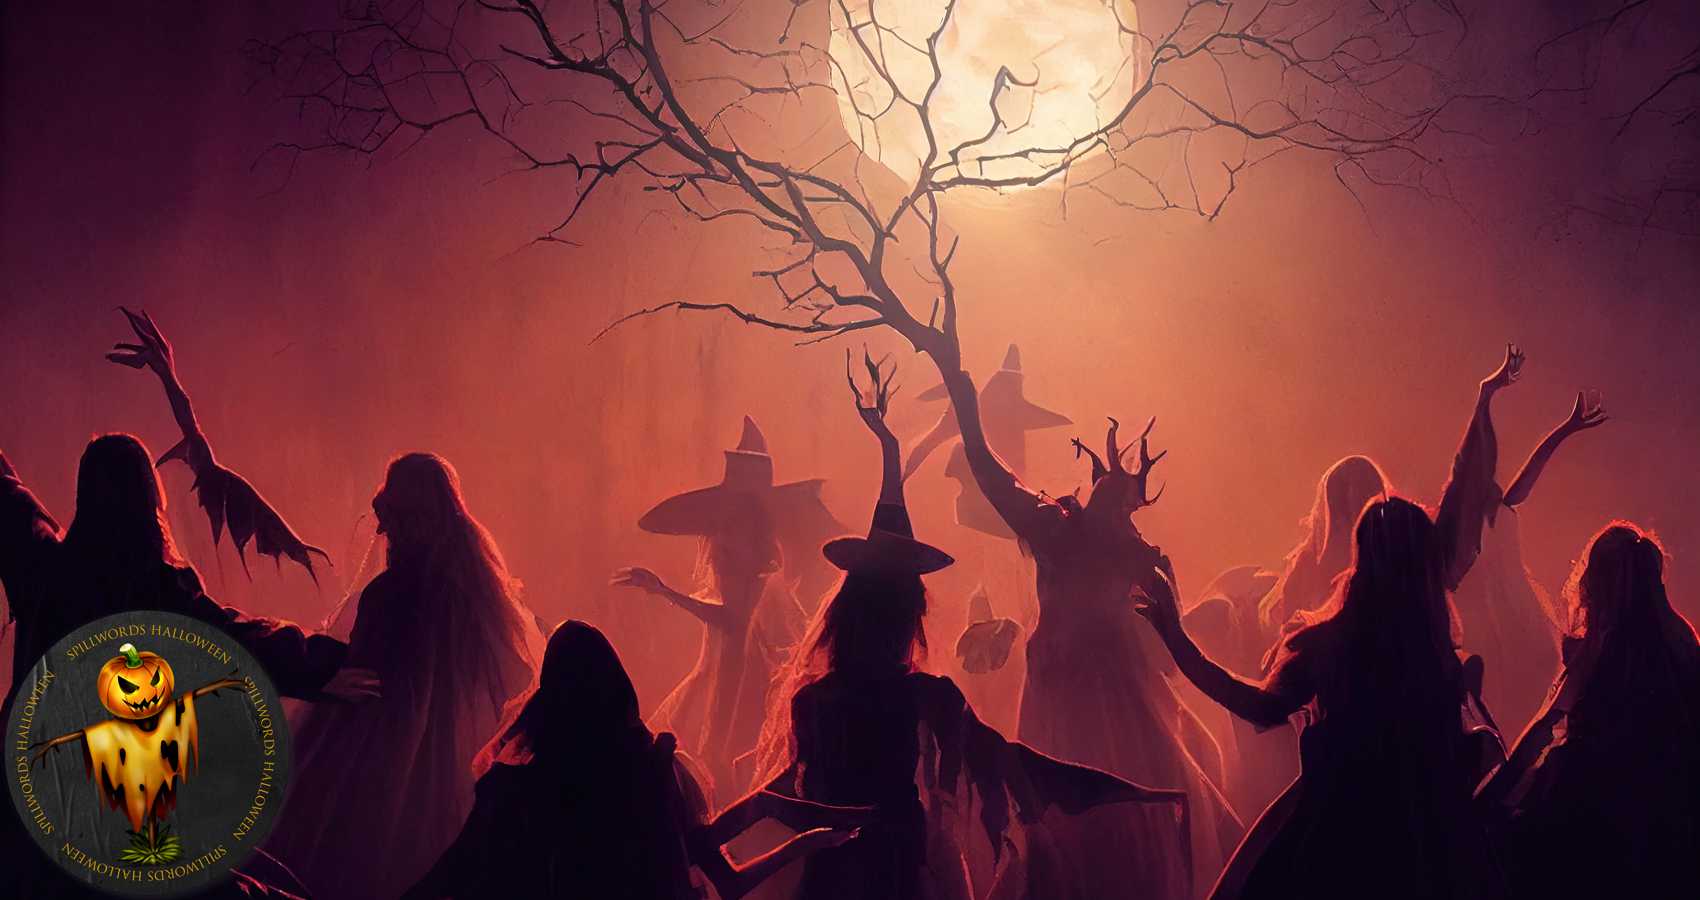 Witches in The Night, a poem by Brittany Benko at Spillwords.com